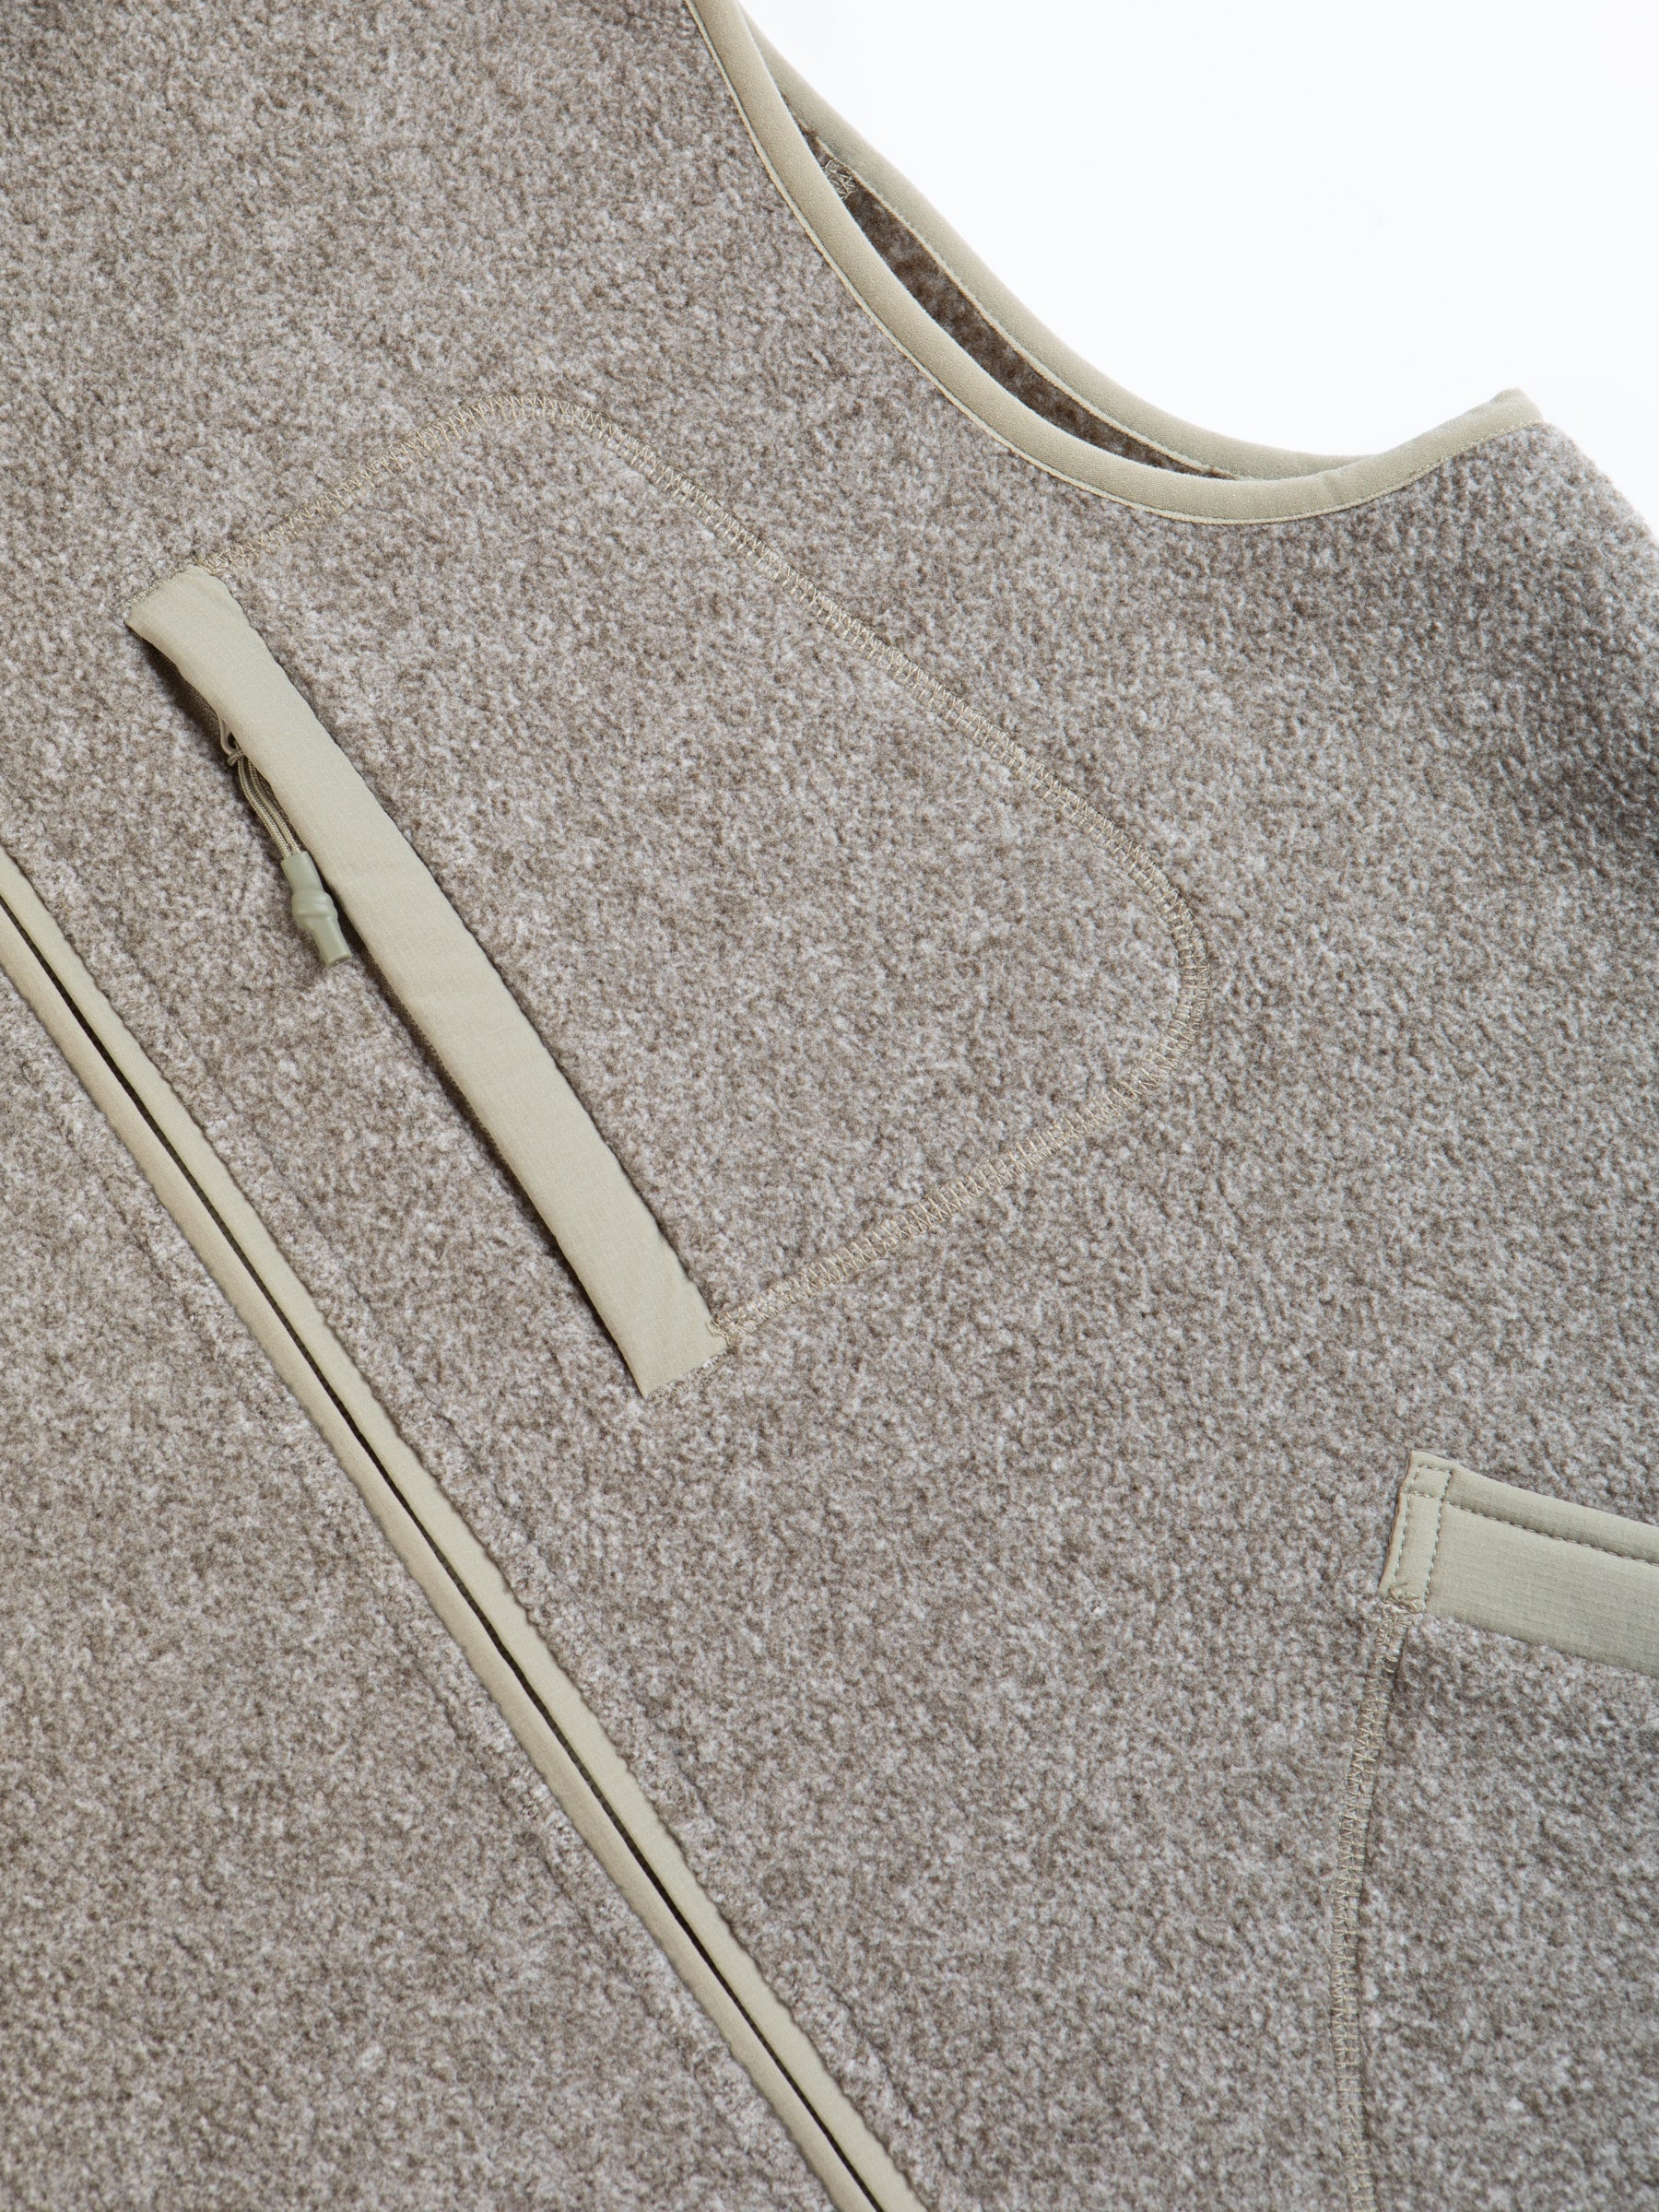 A green marled fleece material on a men's outerwear vest.